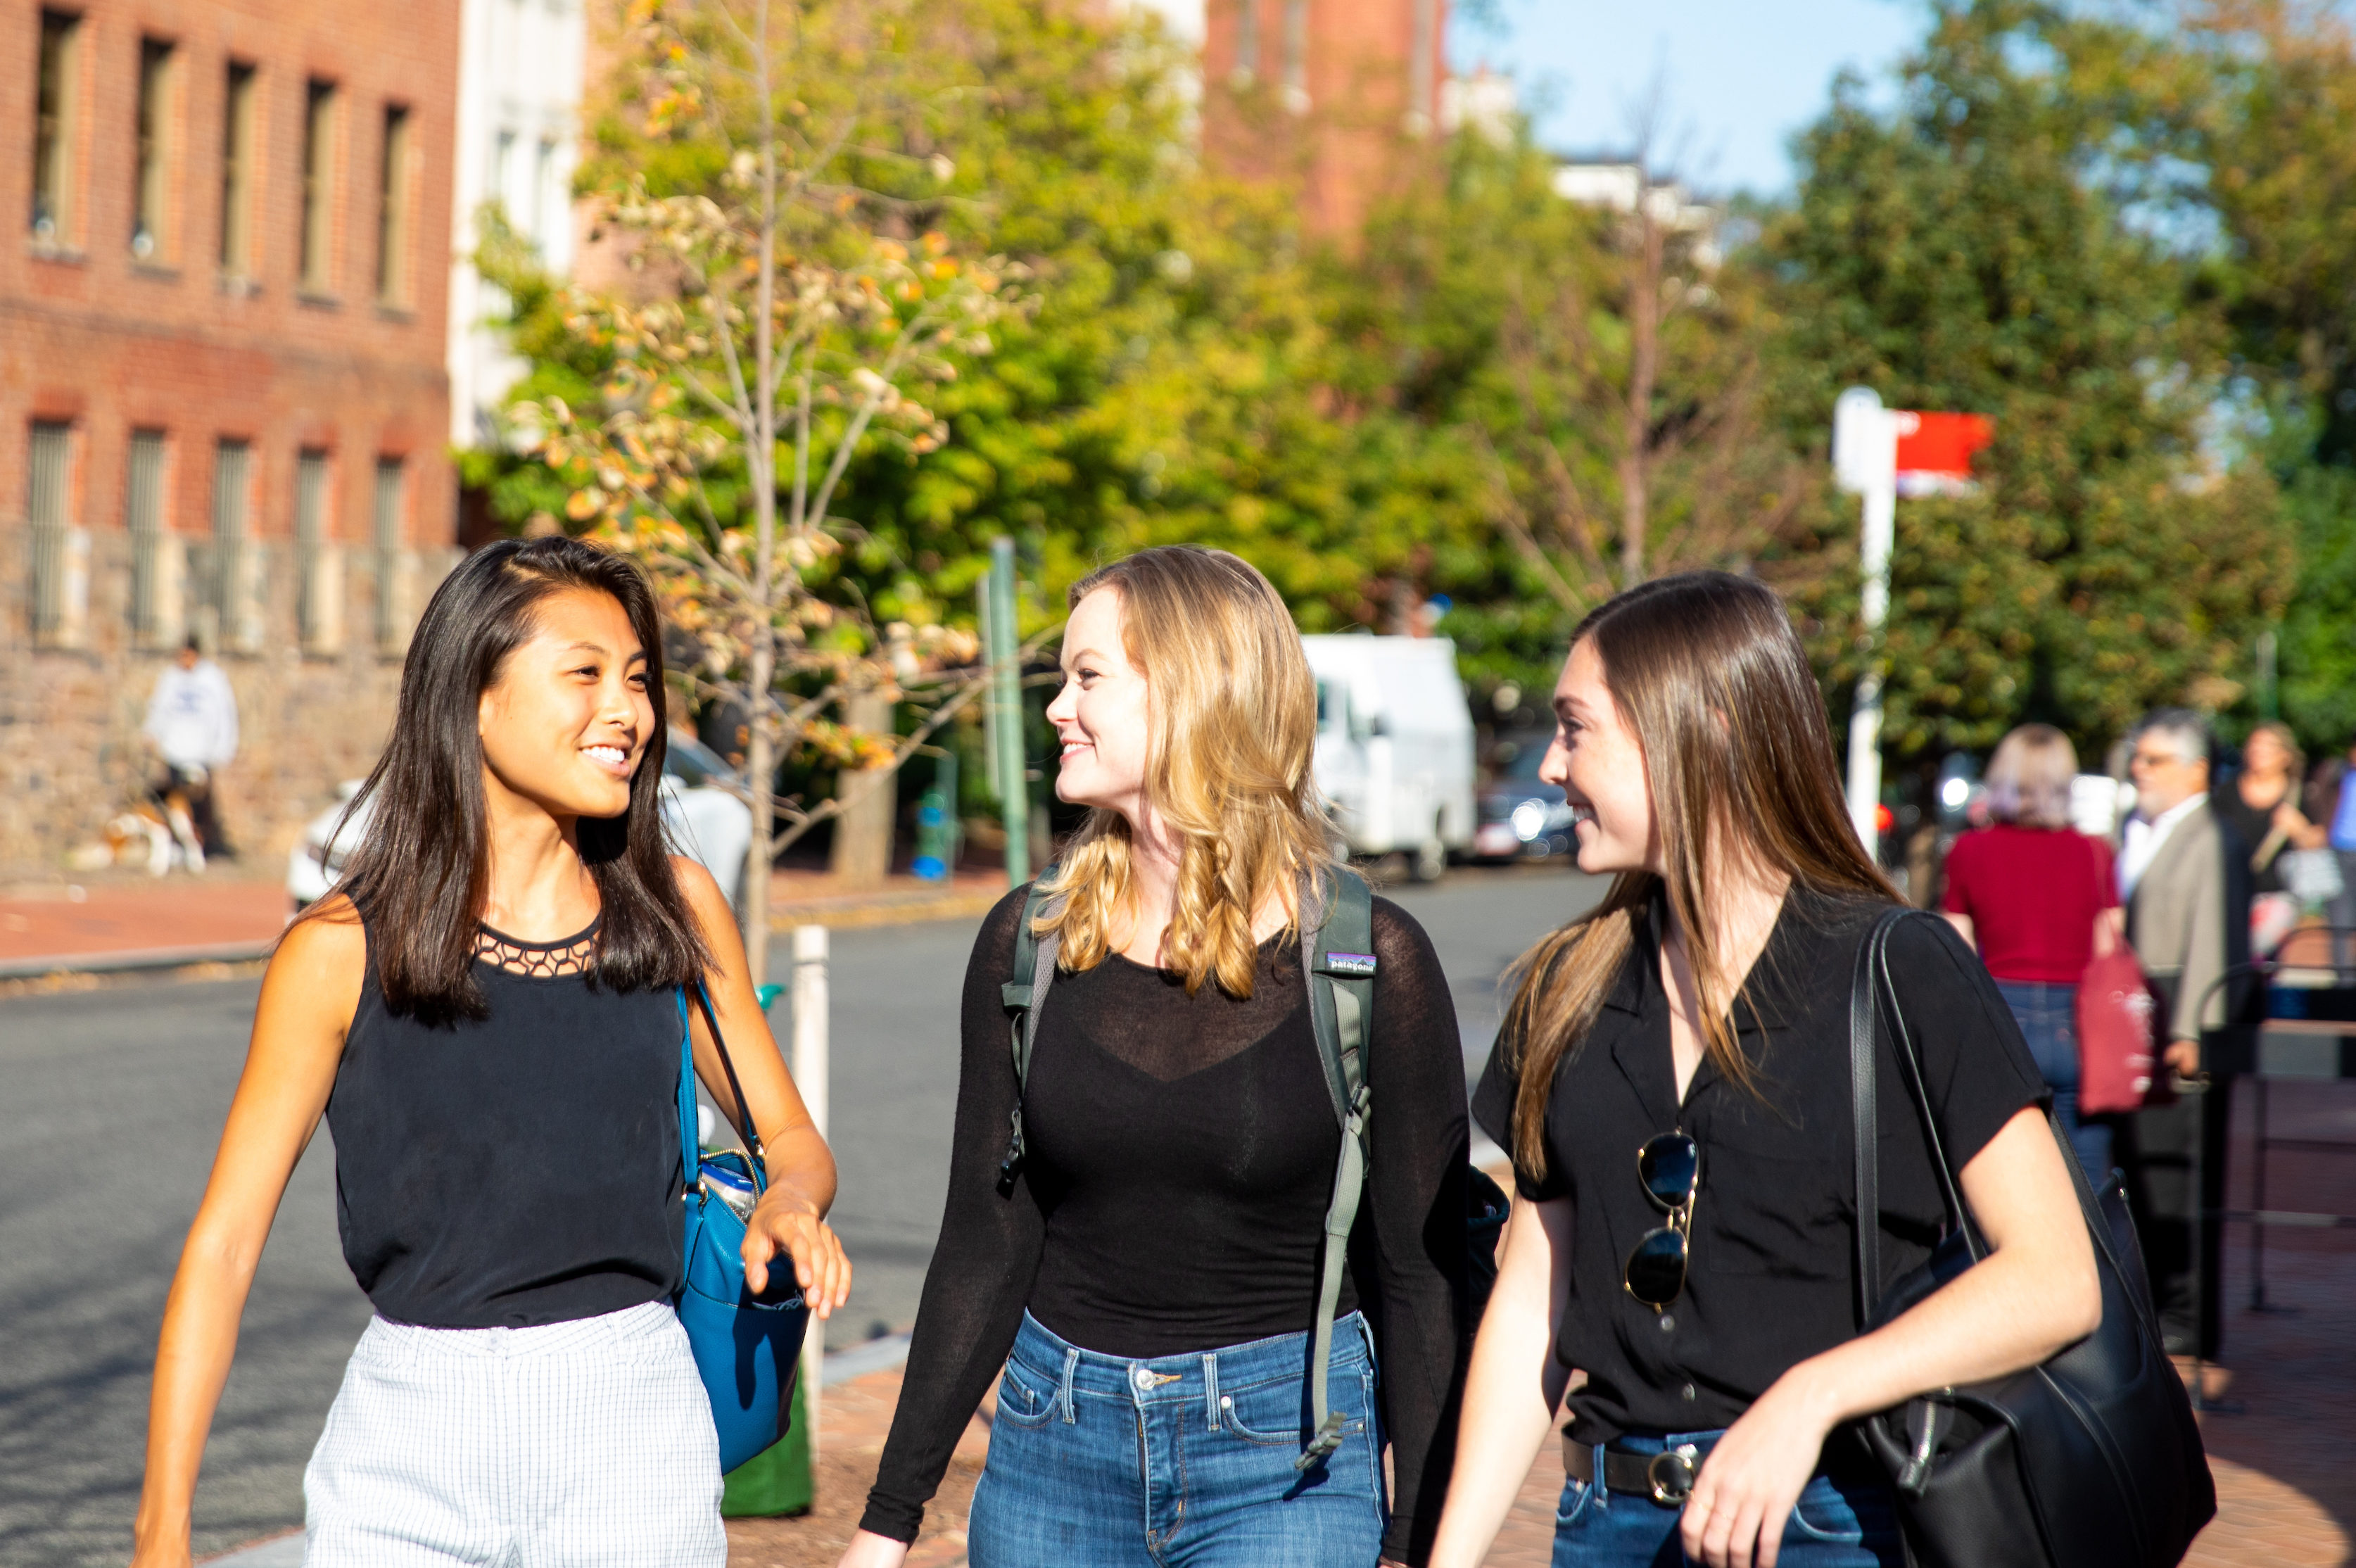 Three students talk while walking across campus